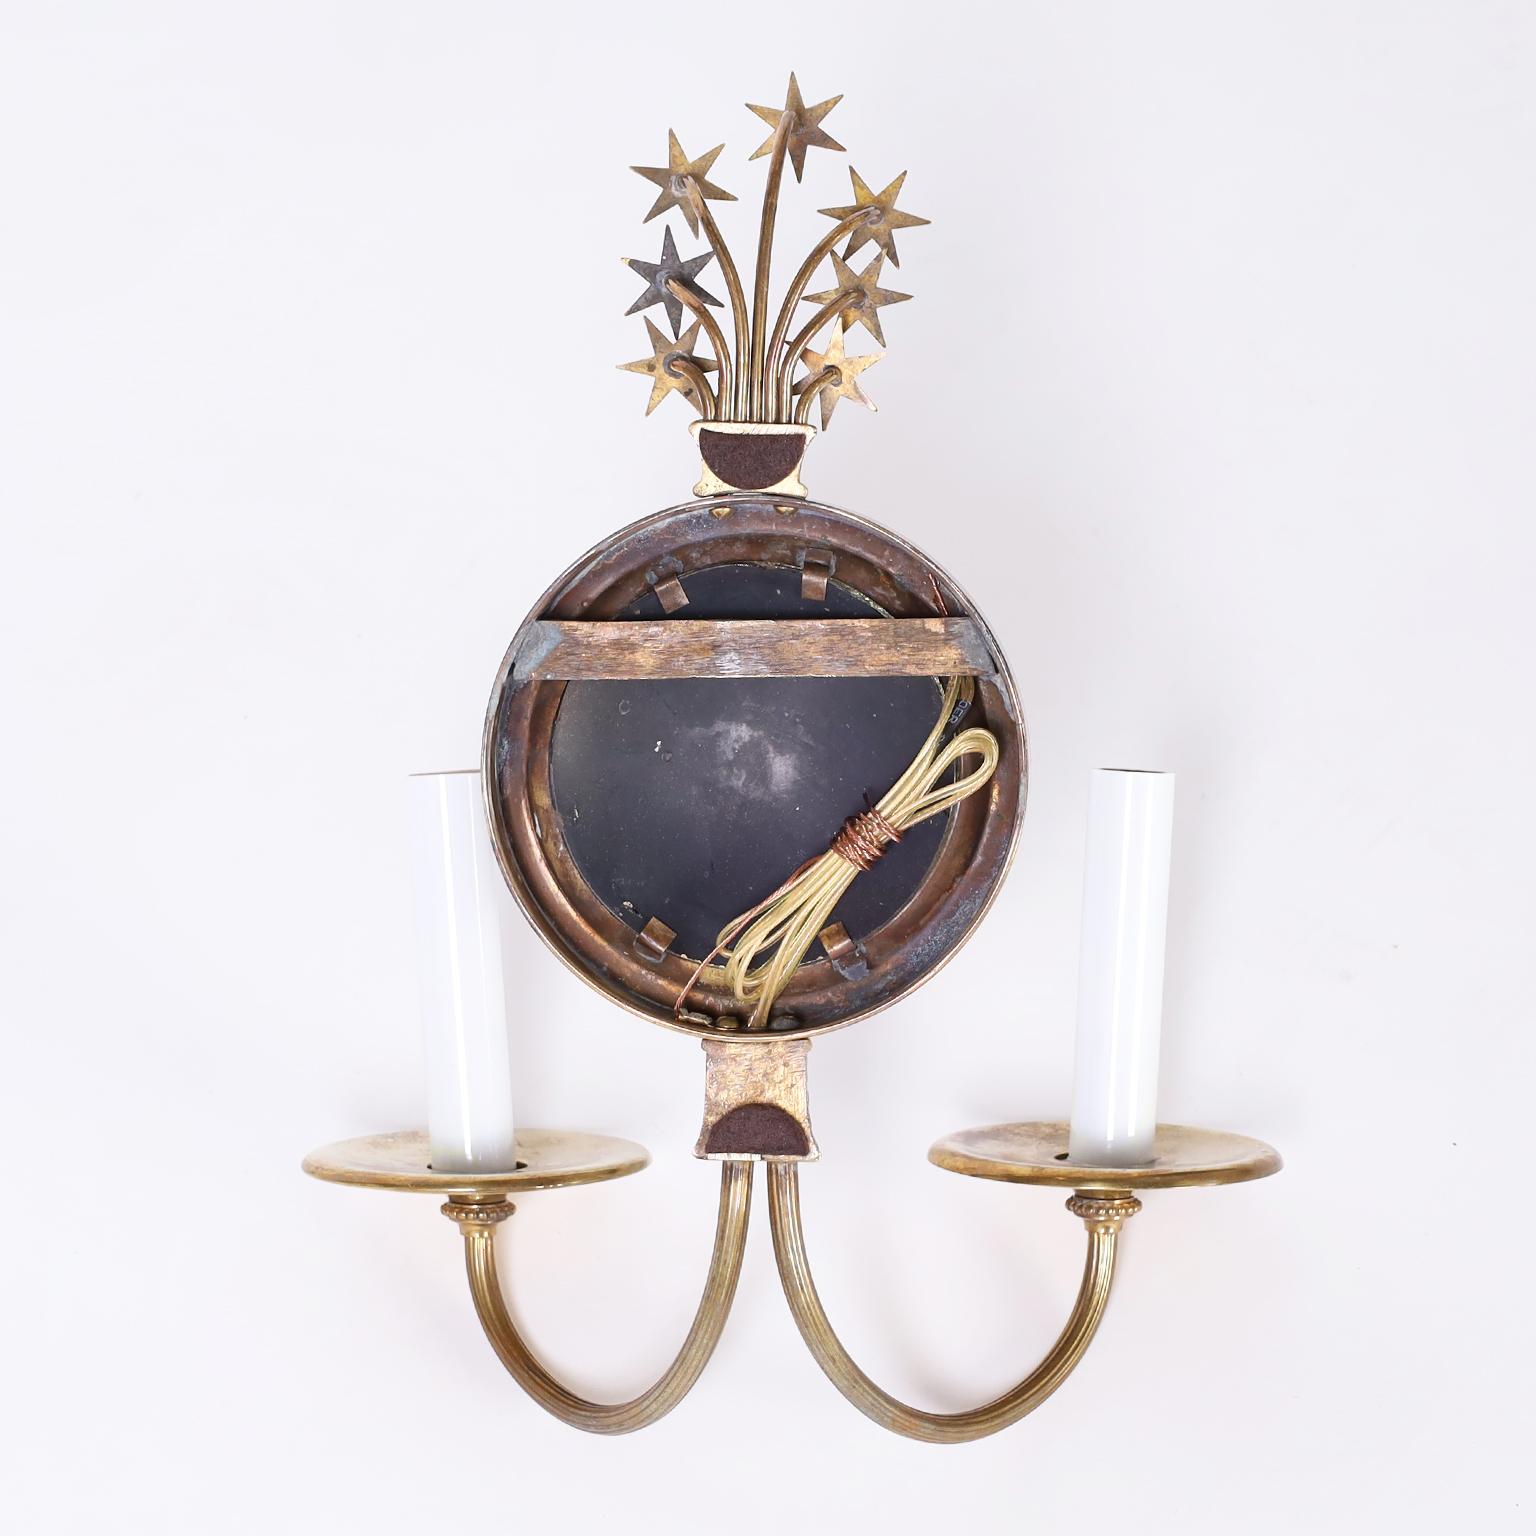 20th Century Pair of Brass & Mirrored Wall Sconces with Stars